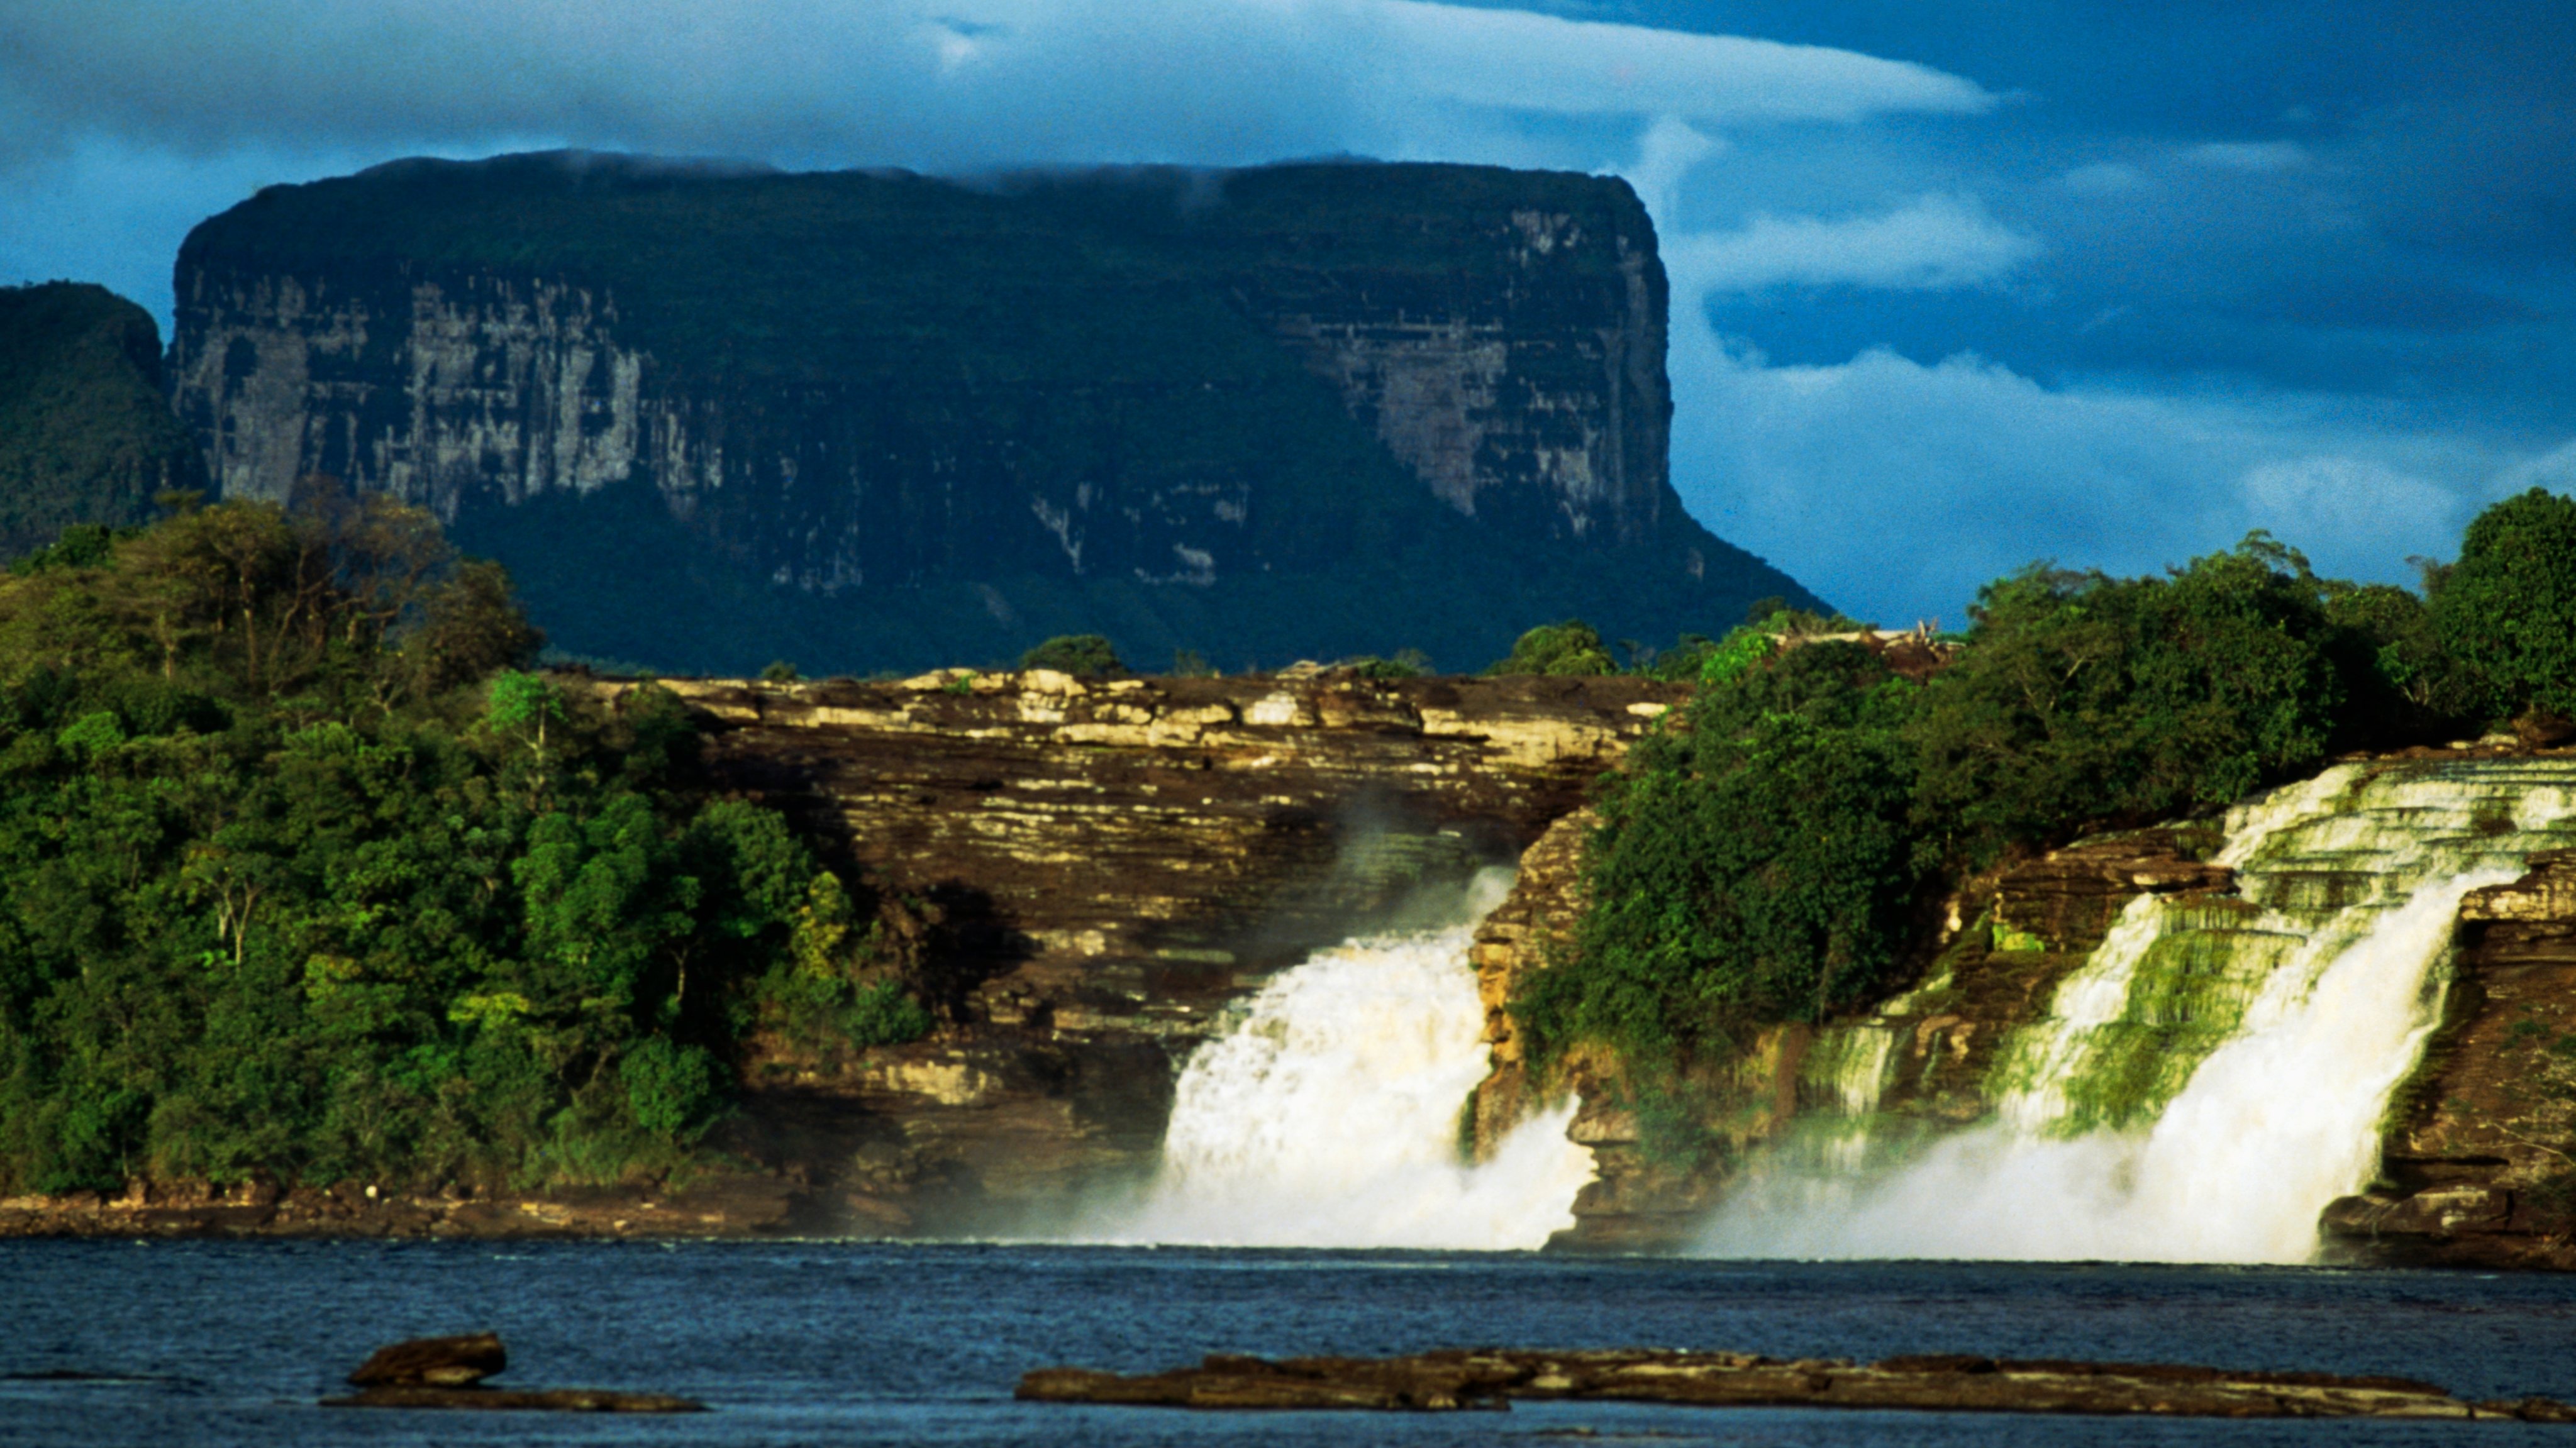 The Hacha Falls in Canaima National Park